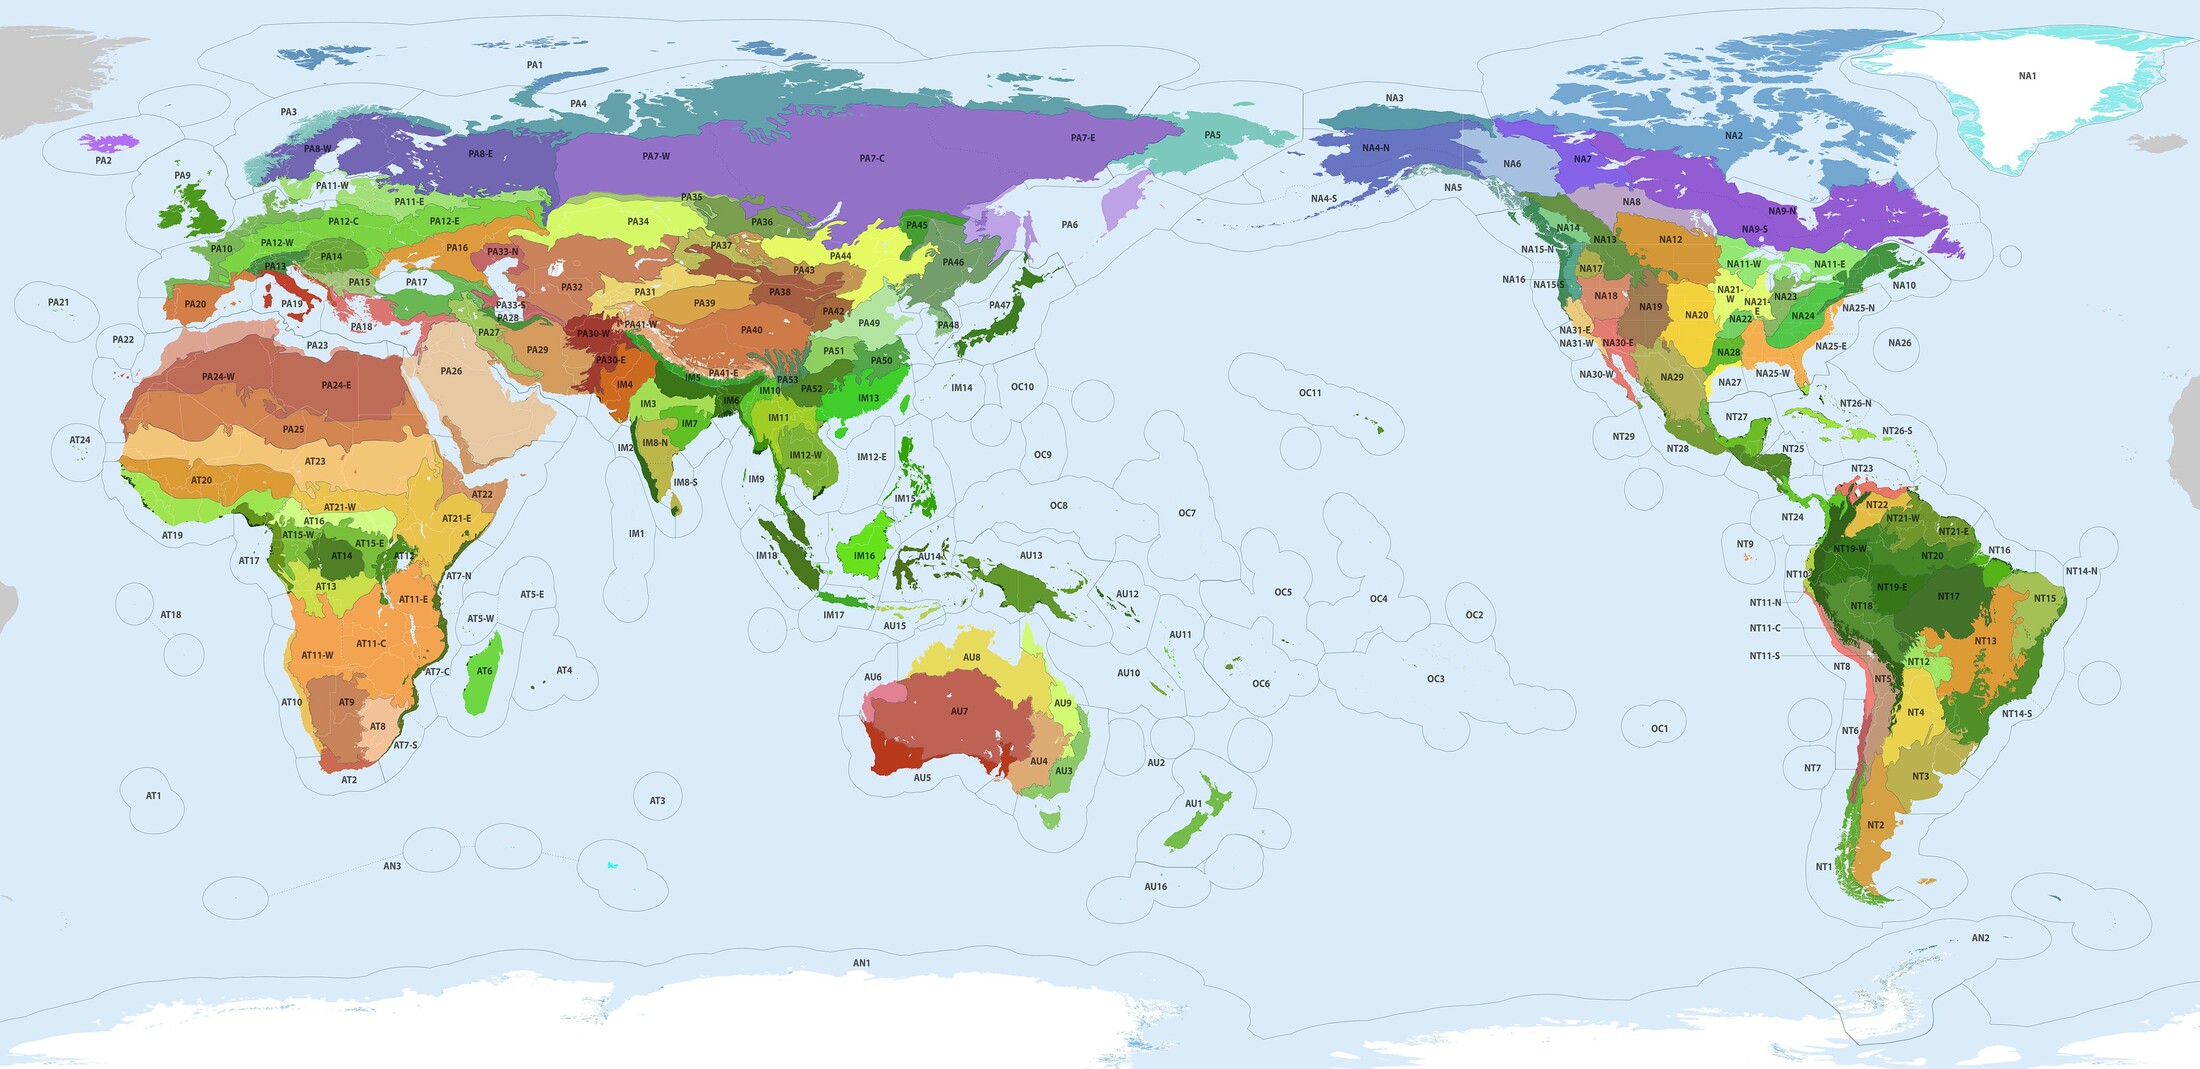 The Bioregions Framework (2023) is a new map of the Earth created by intersecting biomes with large-scale geological structures and ecoregional groupings to delineate 185 discrete bioregions.